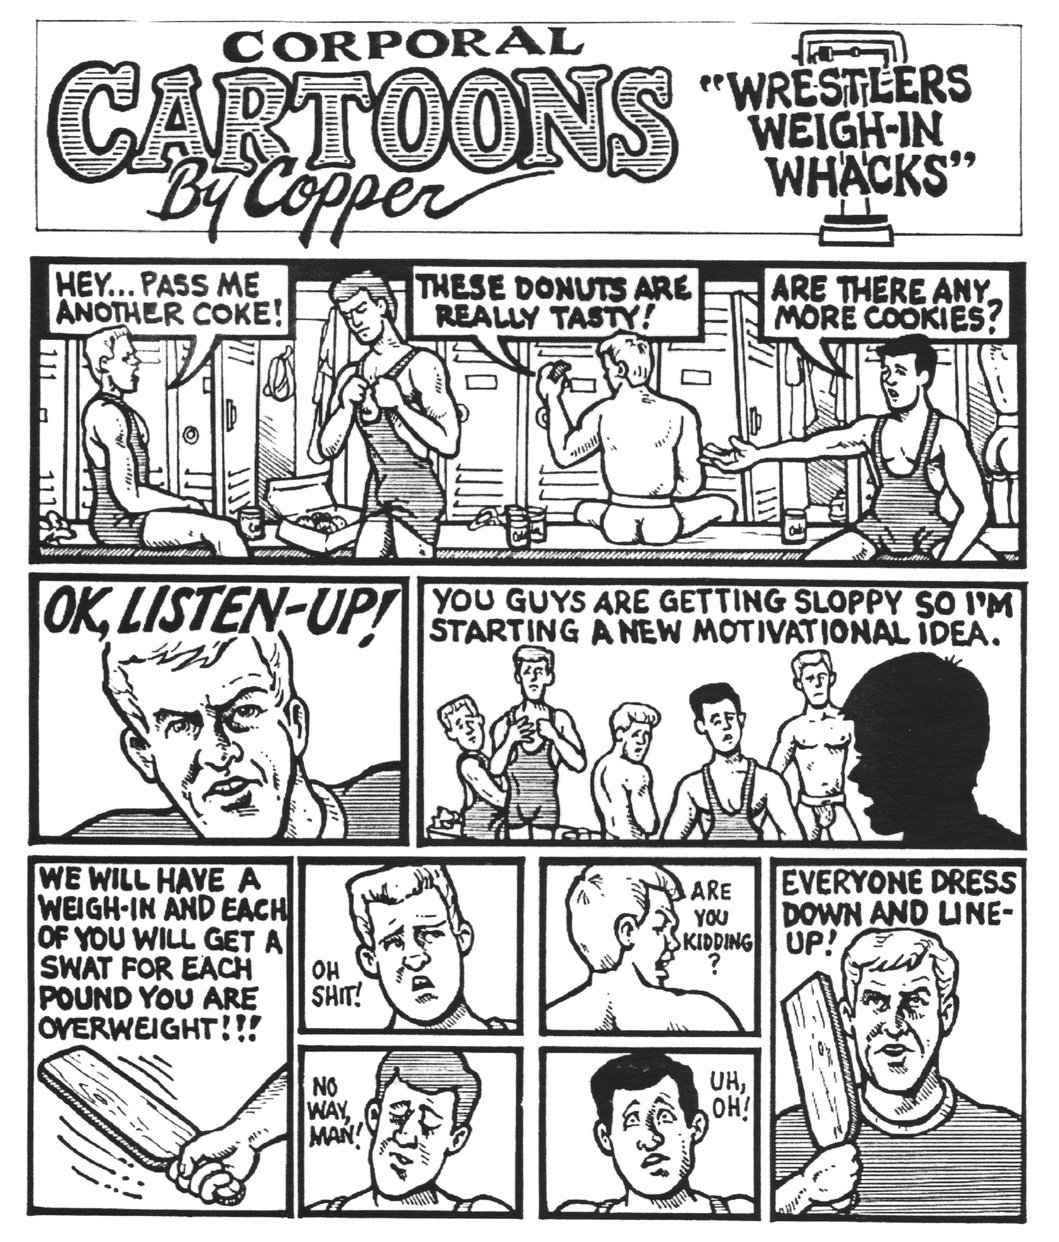 Copper, Corporal Cartoons %22Wrestlers Weigh-in Whacks%22_1.jpeg